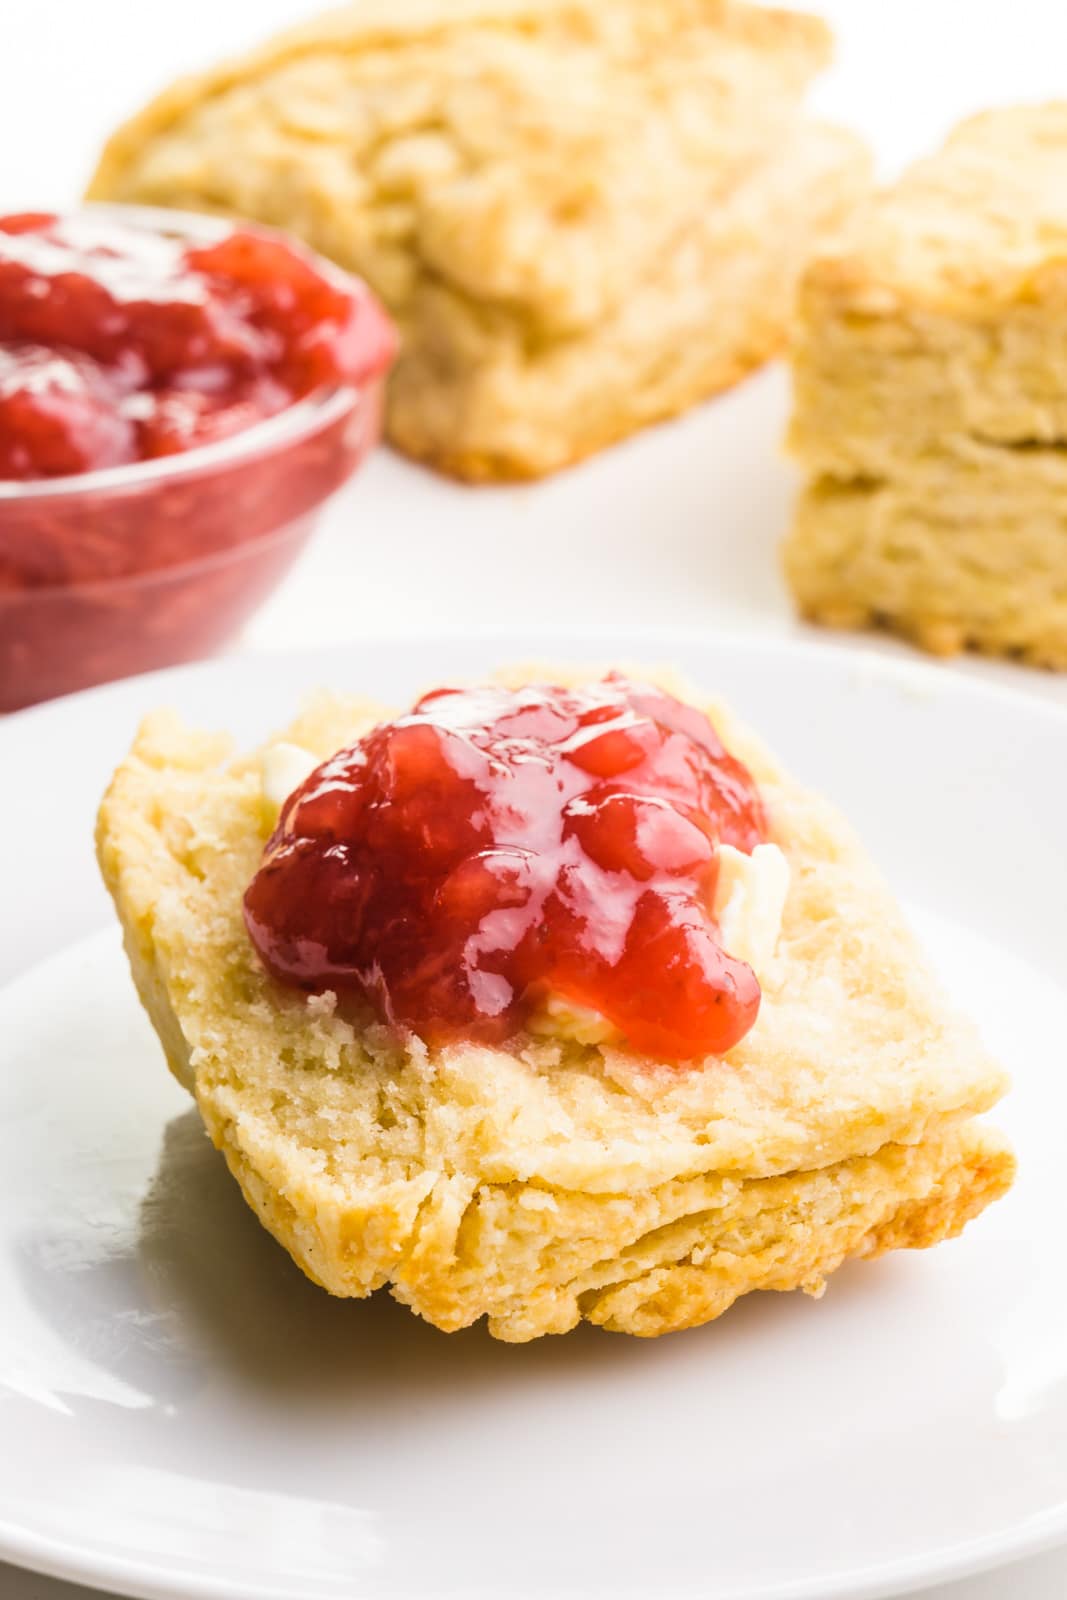 Half of a biscuit is on a plate. It's topped with butter and strawberry jelly. There's a bowl with more jelly and more biscuits behind it.